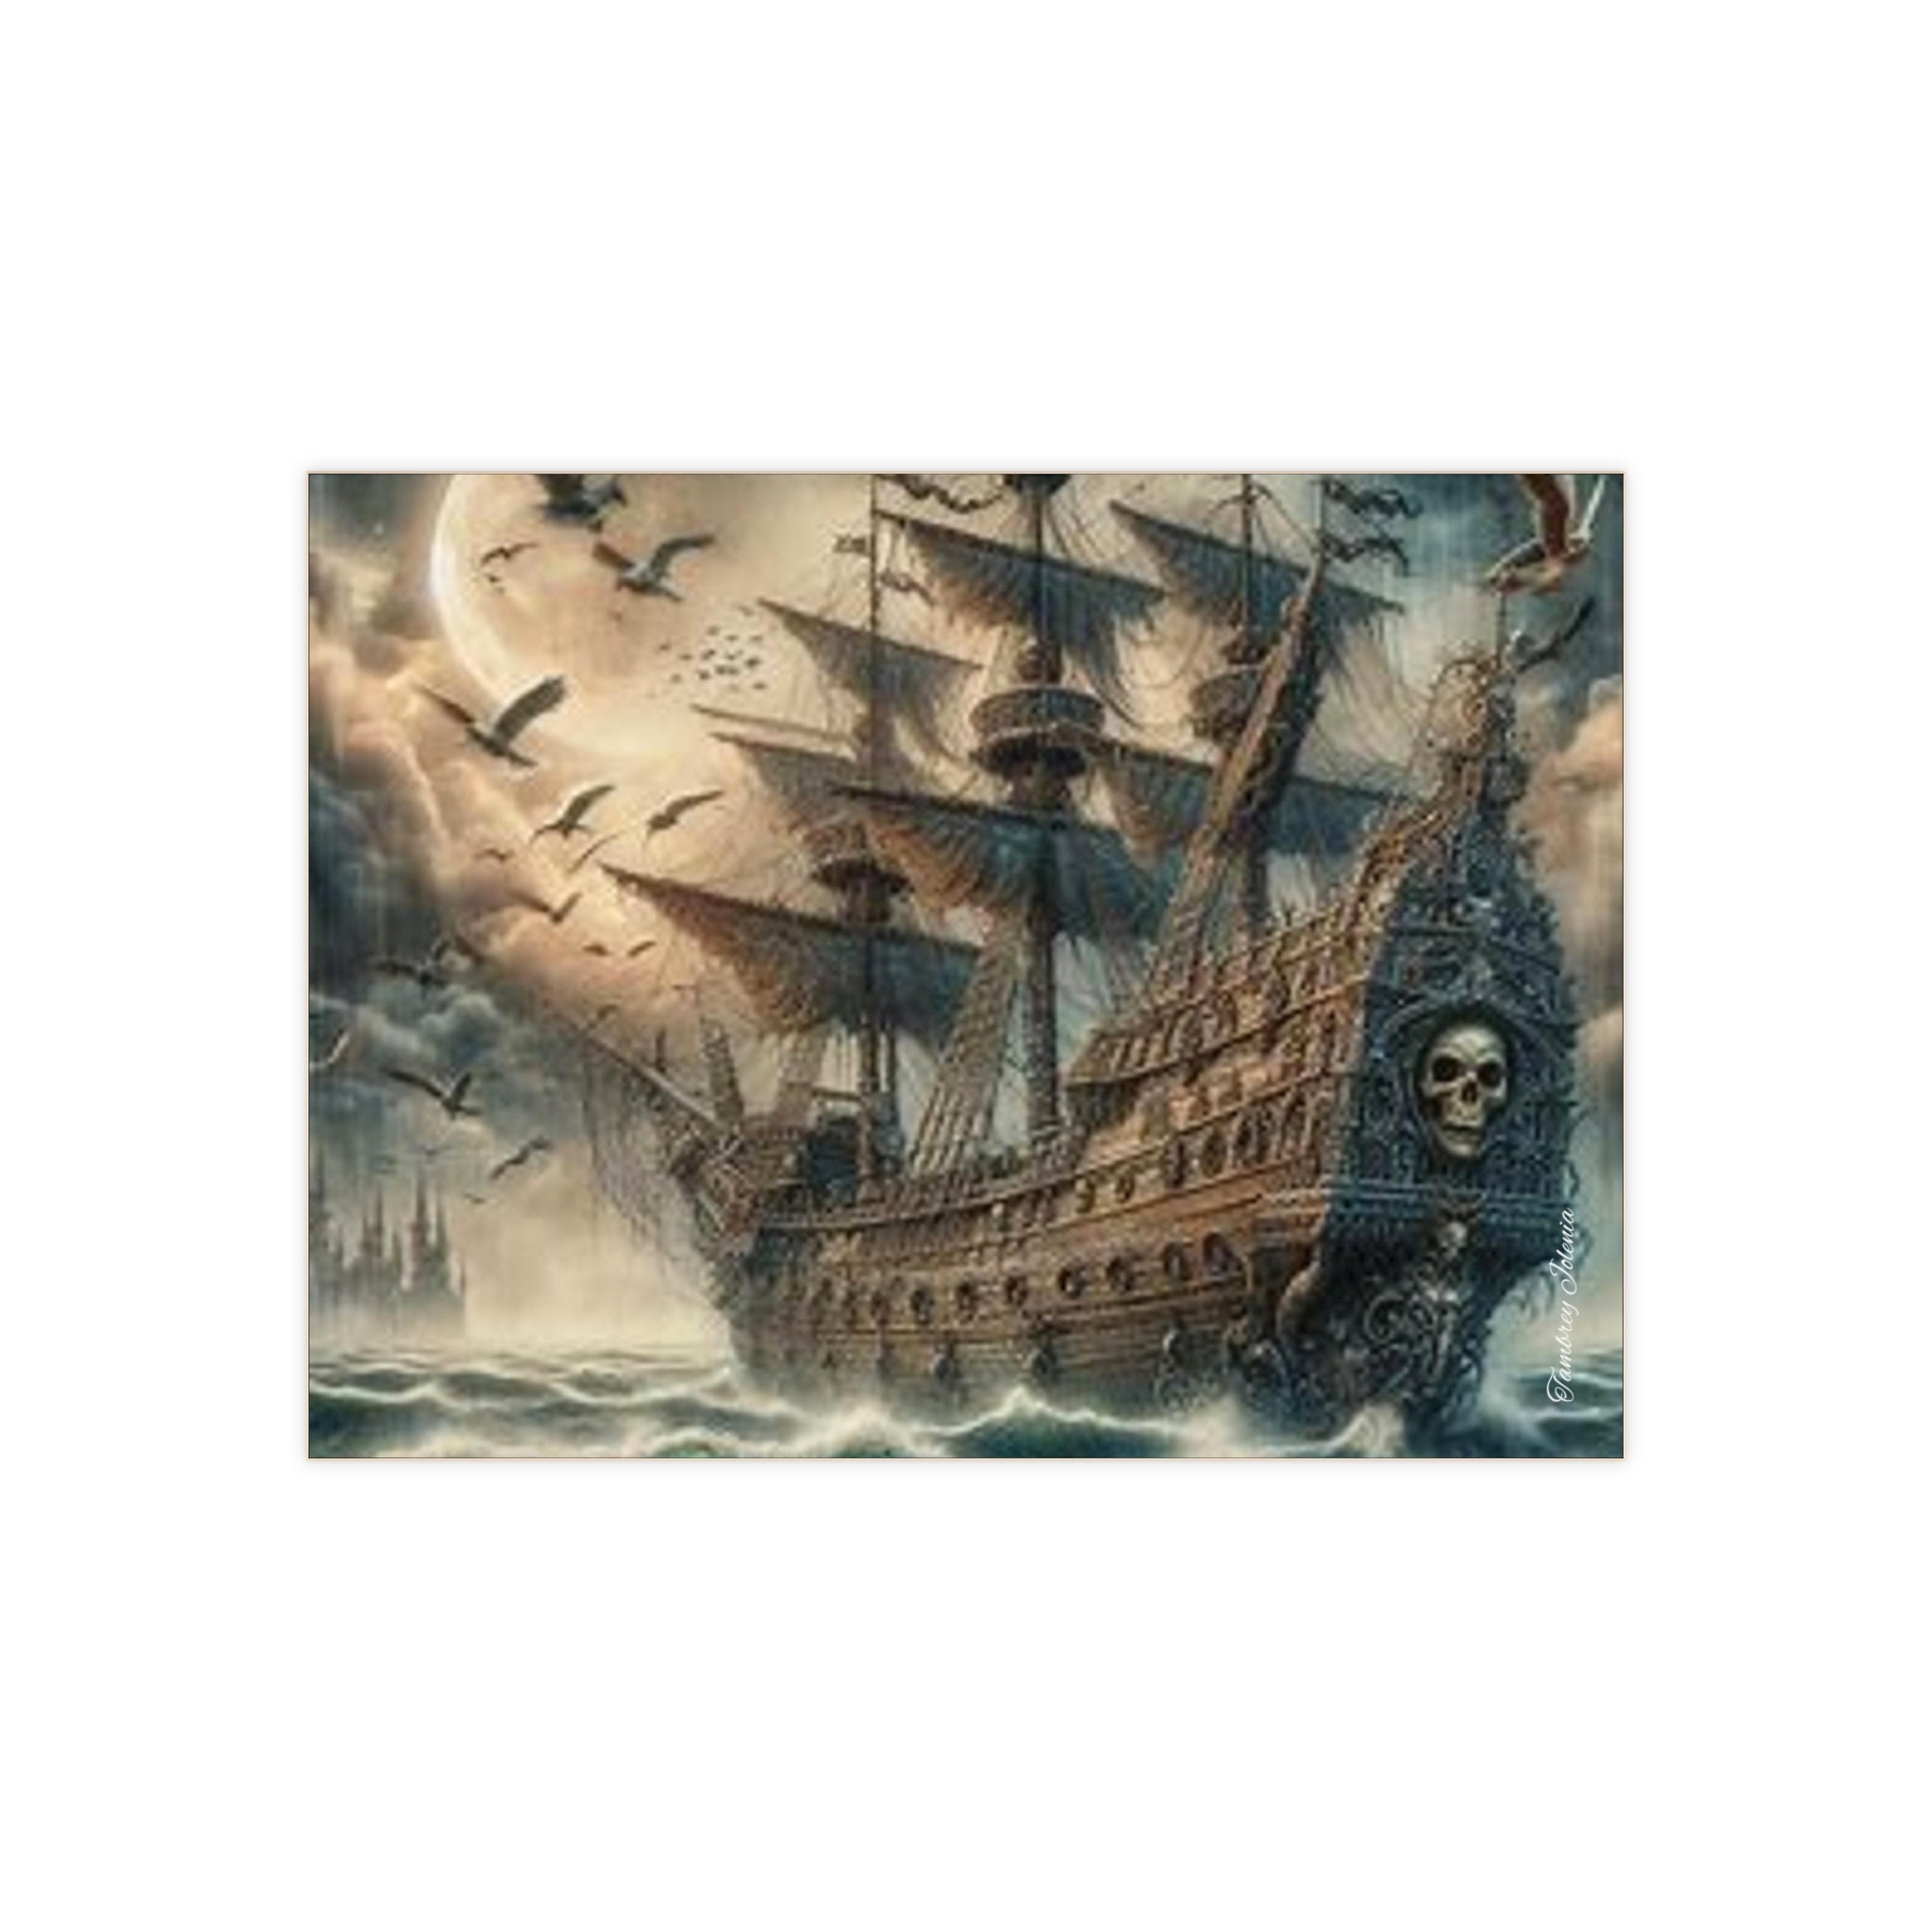 Pirate Ship in the Storm Ceramic Photos Tile, Home Decor